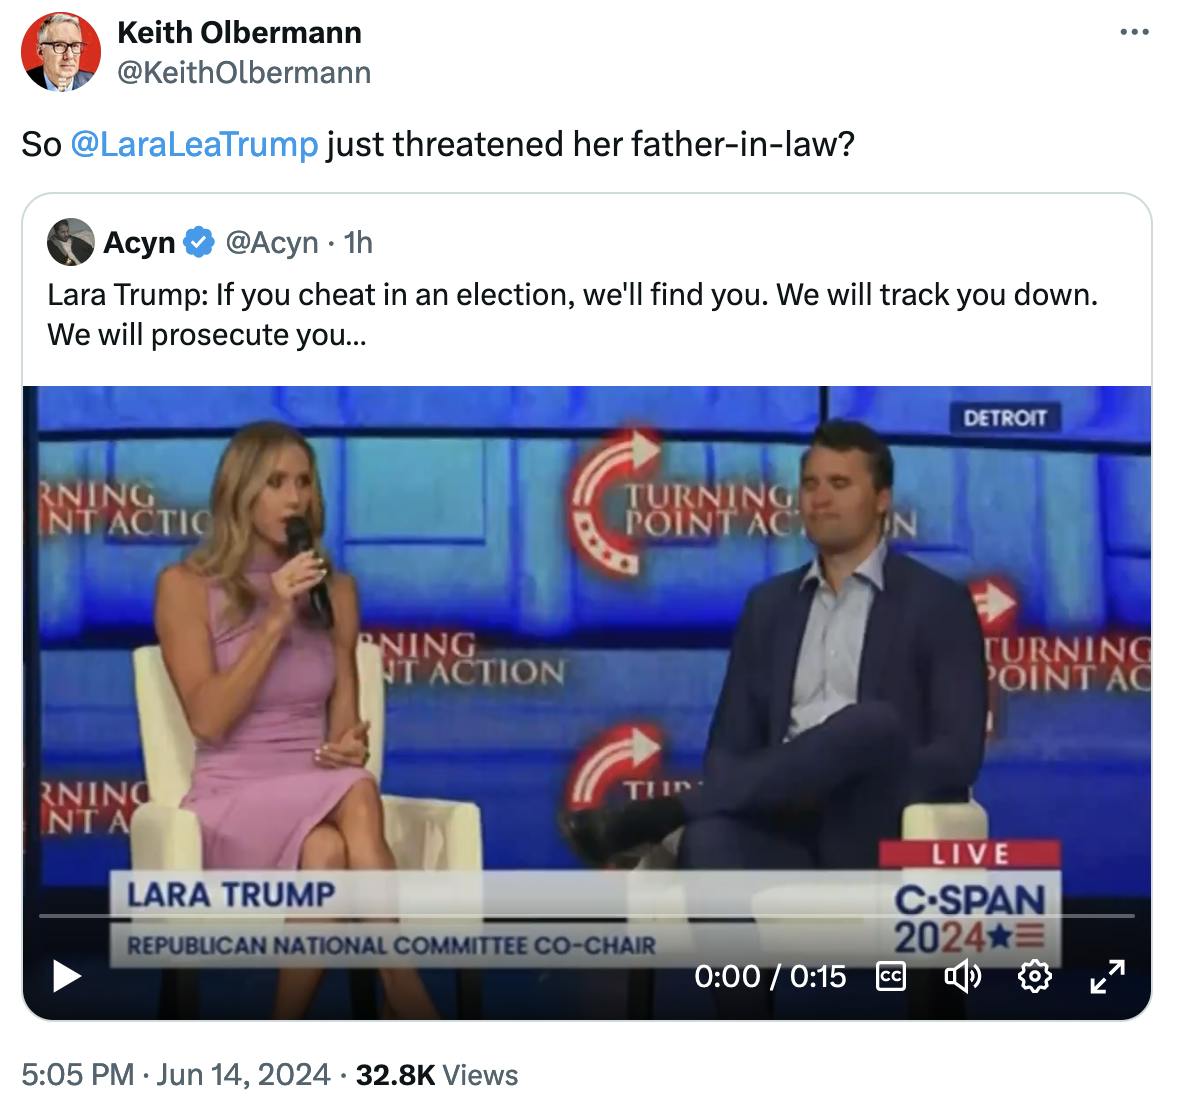 Twitter Screenshot Keith Olbermann: So @LaraLeaTrump just threatened her father-in-law?